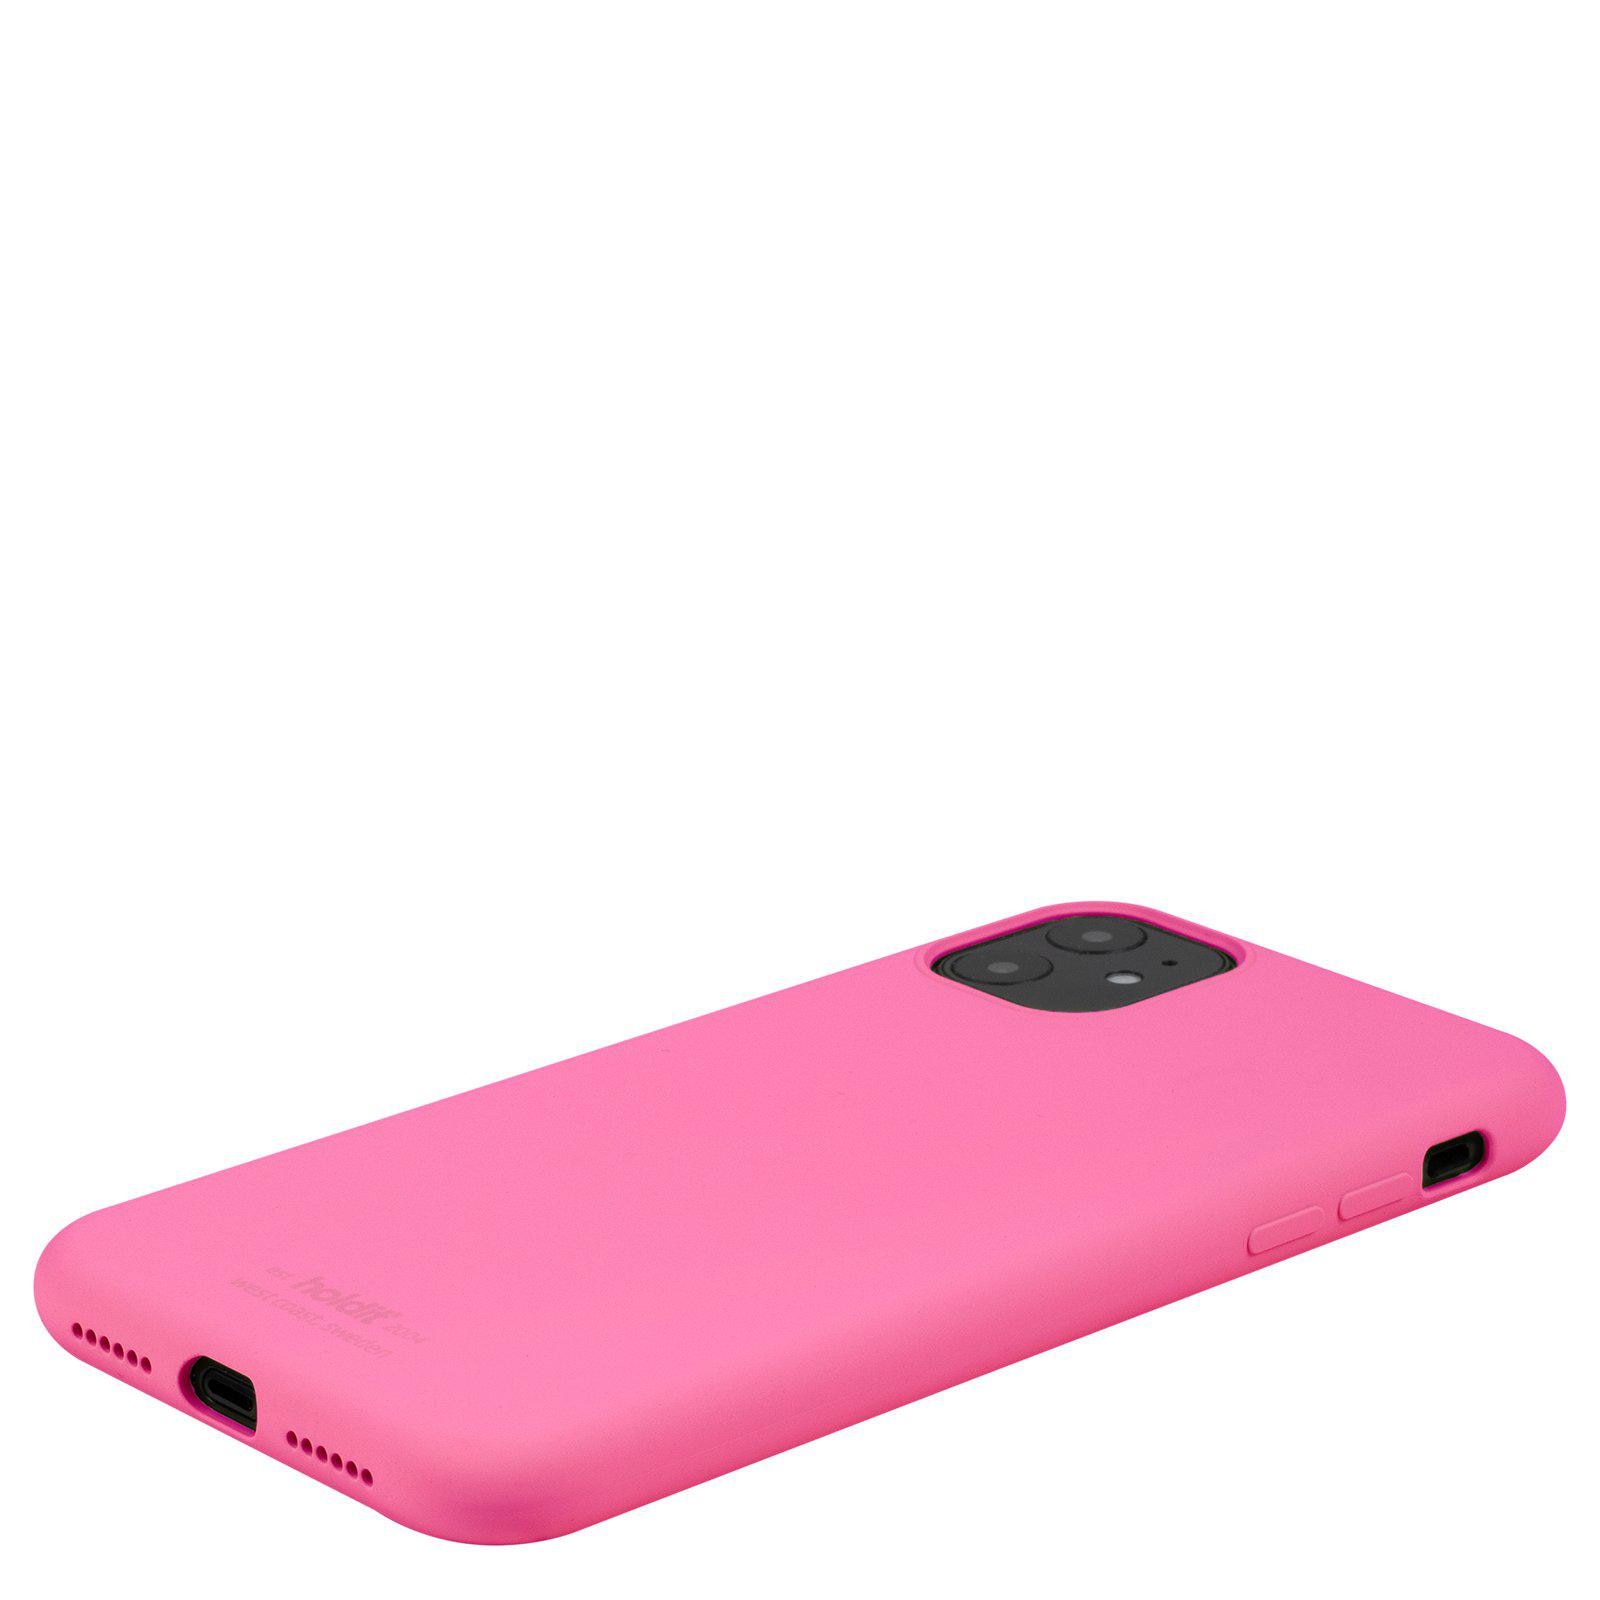 iPhone 11 Silicone Case, Bright Pink